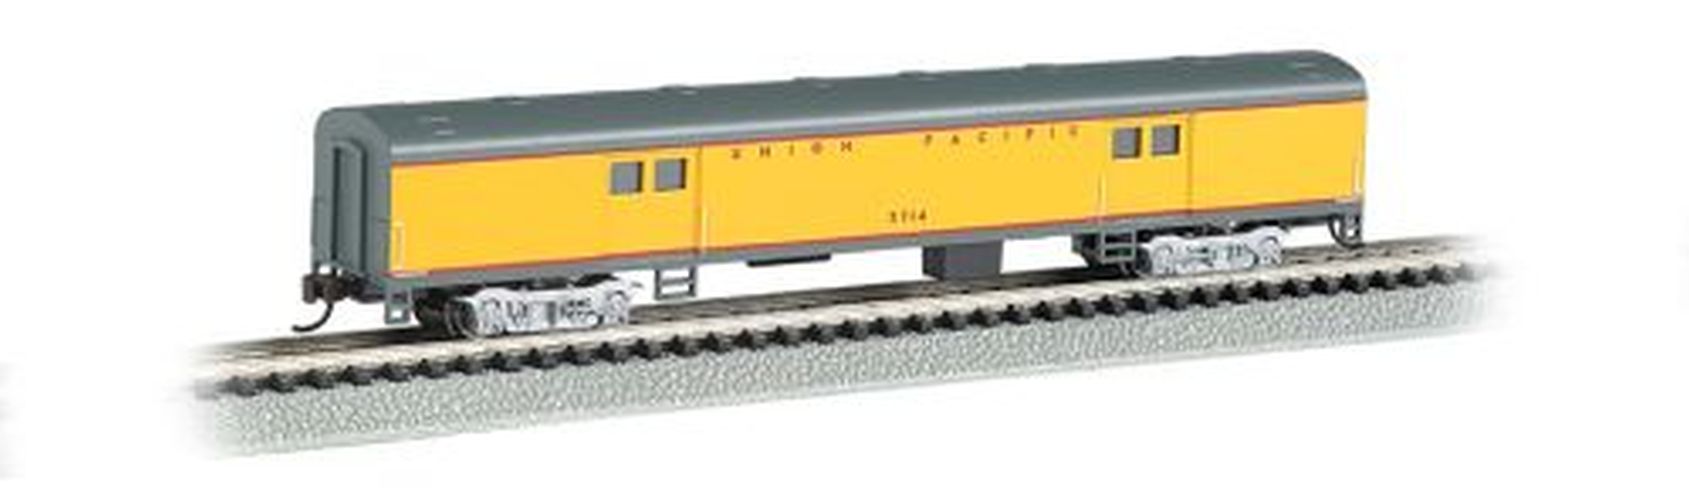 BACHMANN Union Pacific N Scale 72 Smooth Side Baggage Car - .